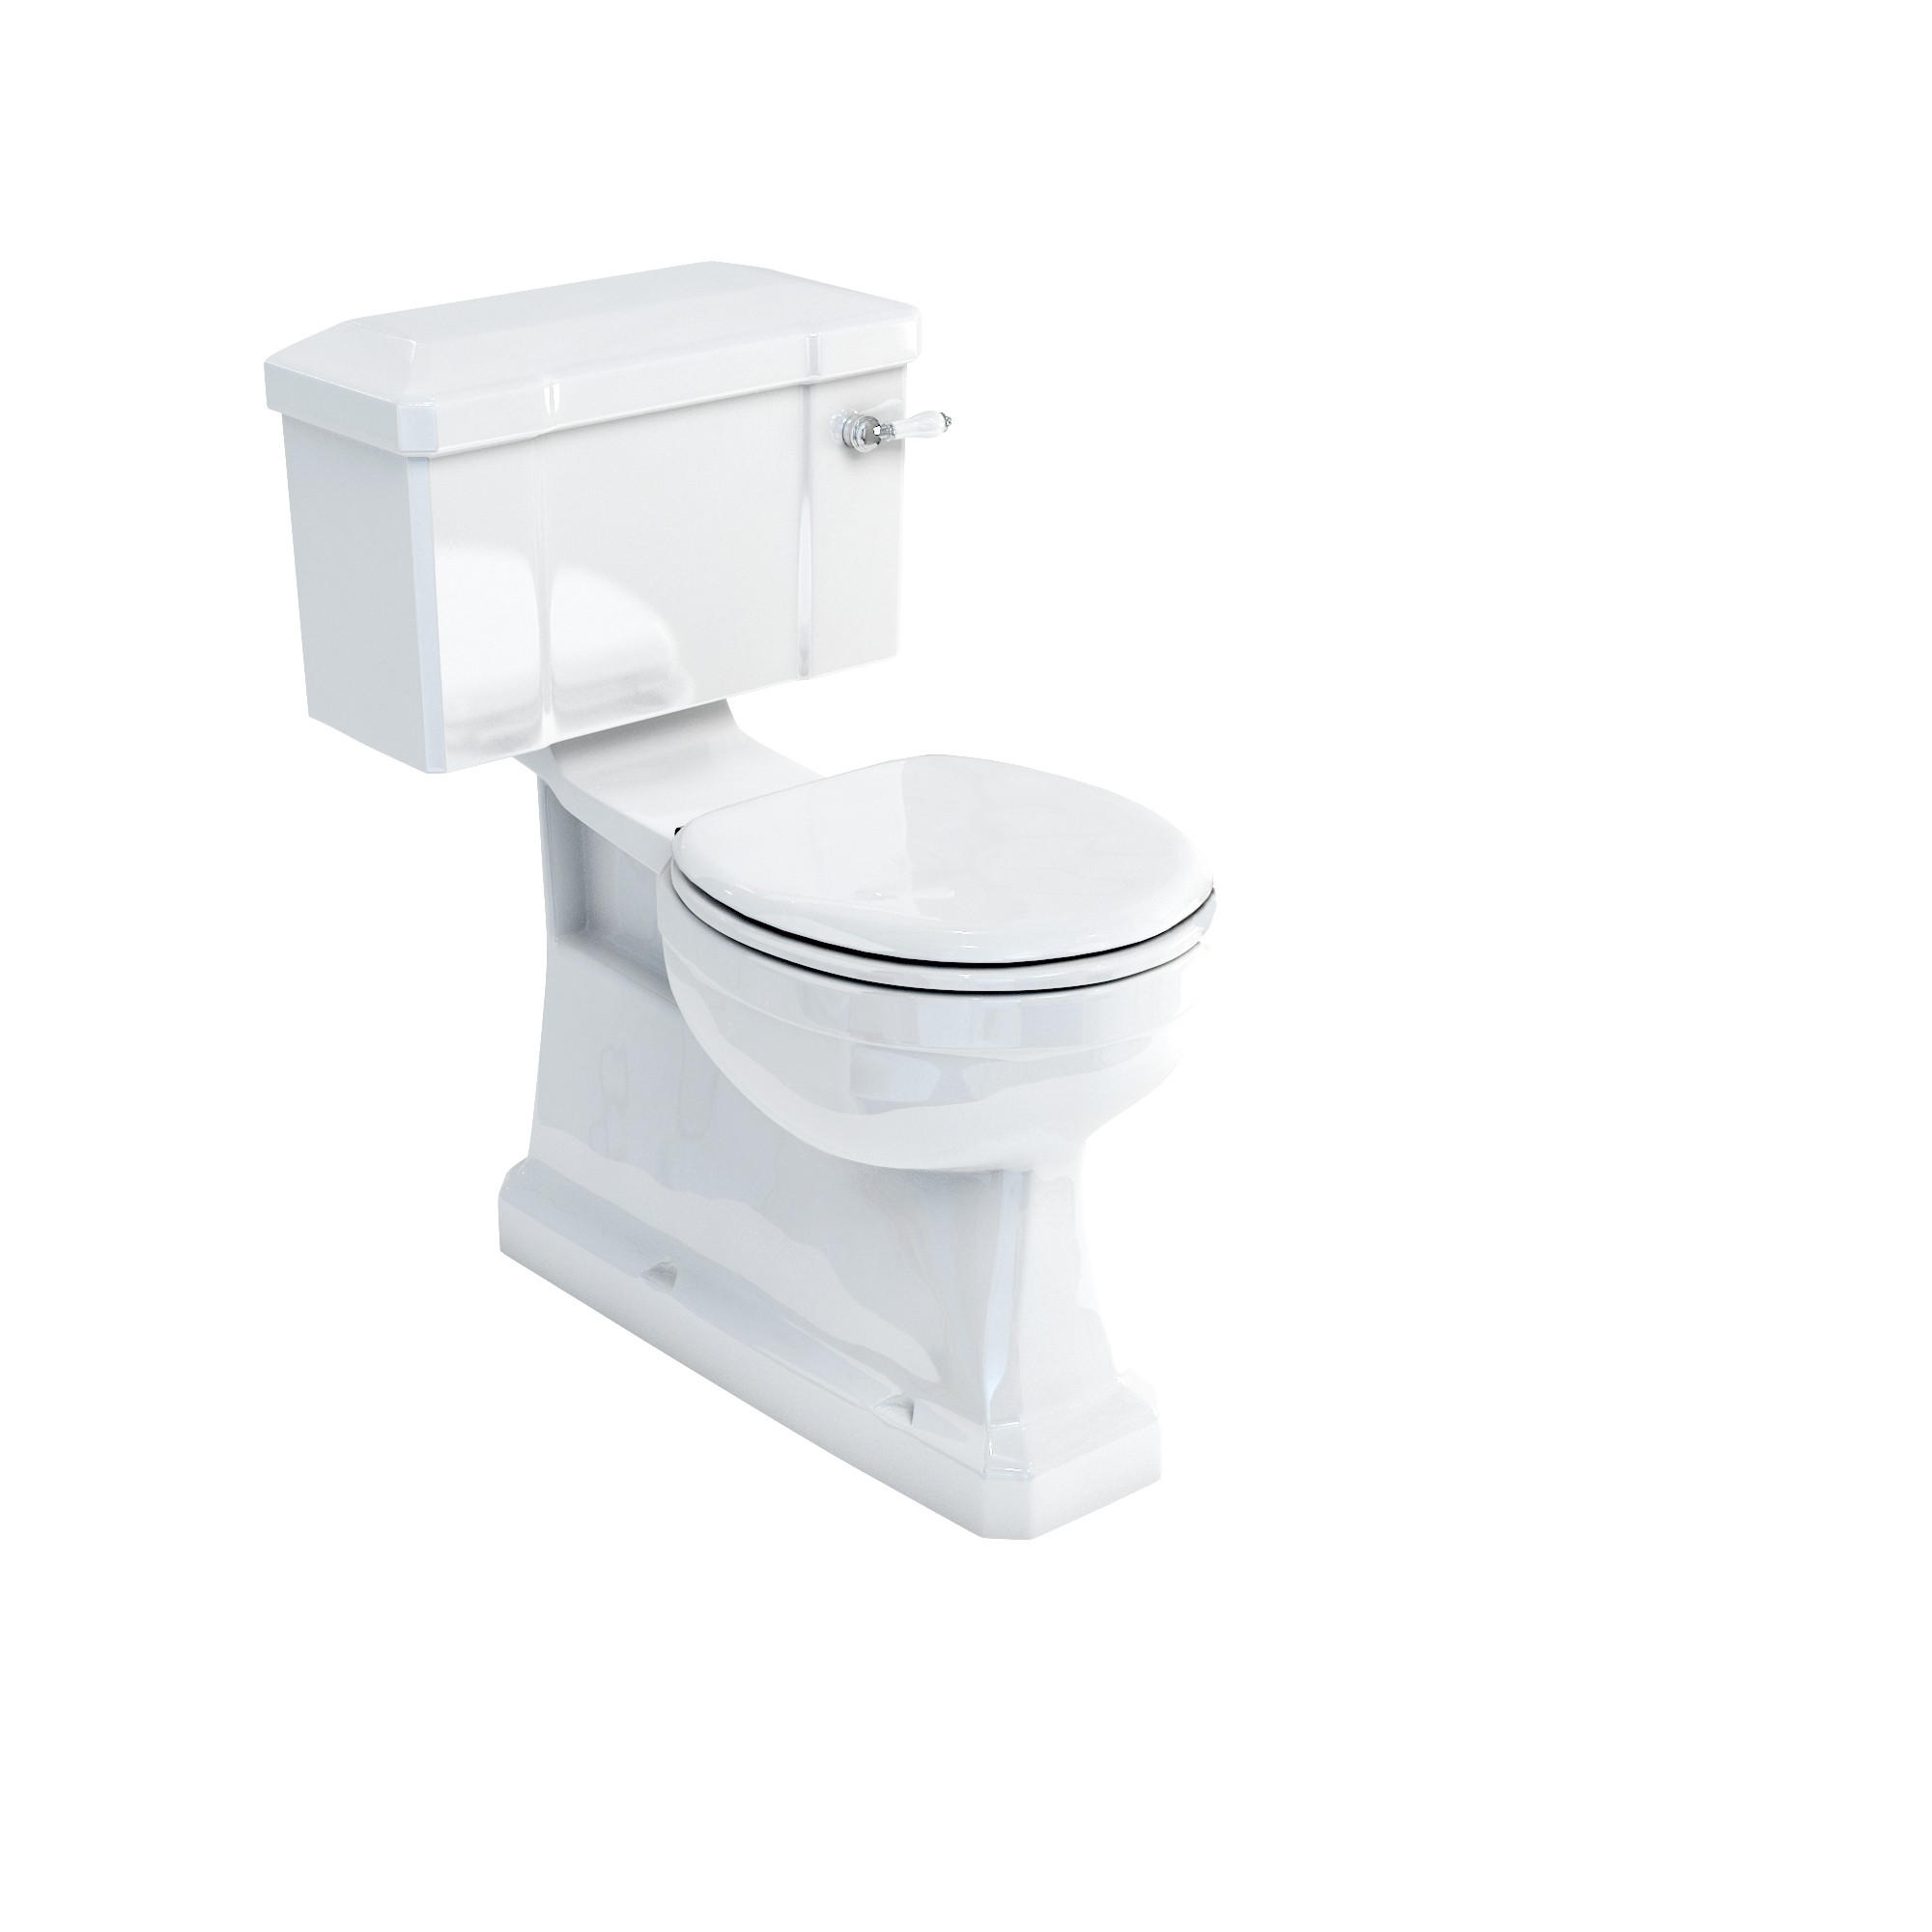 Burlington C30 Extended Depth Close Coupled Cistern with Ceramic Lever & Fittings (WC Pan & Toilet Seat NOT Included)